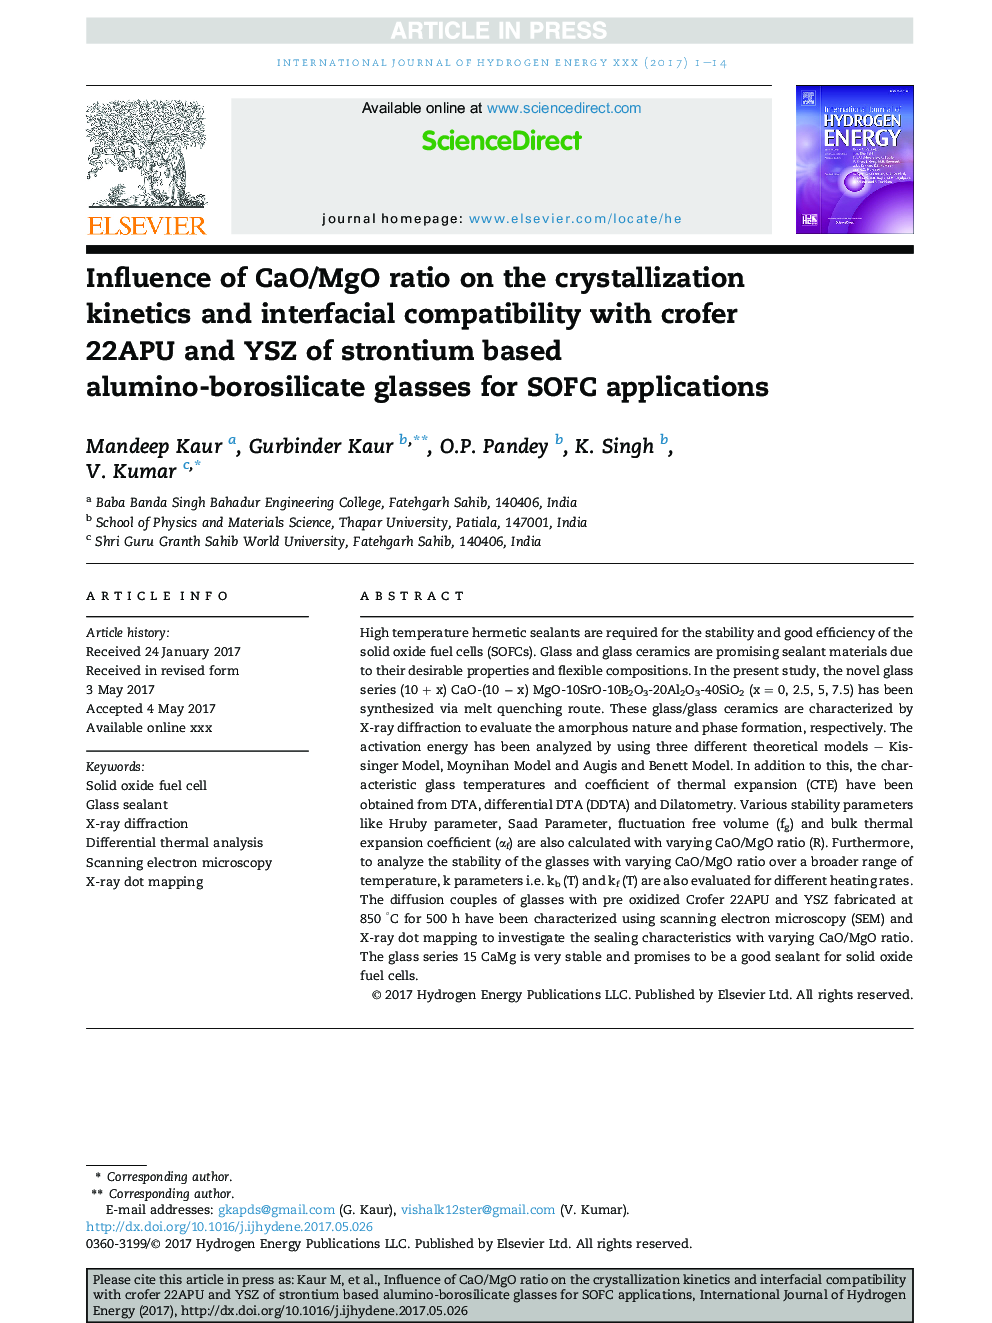 Influence of CaO/MgO ratio on the crystallization kinetics and interfacial compatibility with crofer 22APU and YSZ of strontium based alumino-borosilicate glasses for SOFC applications